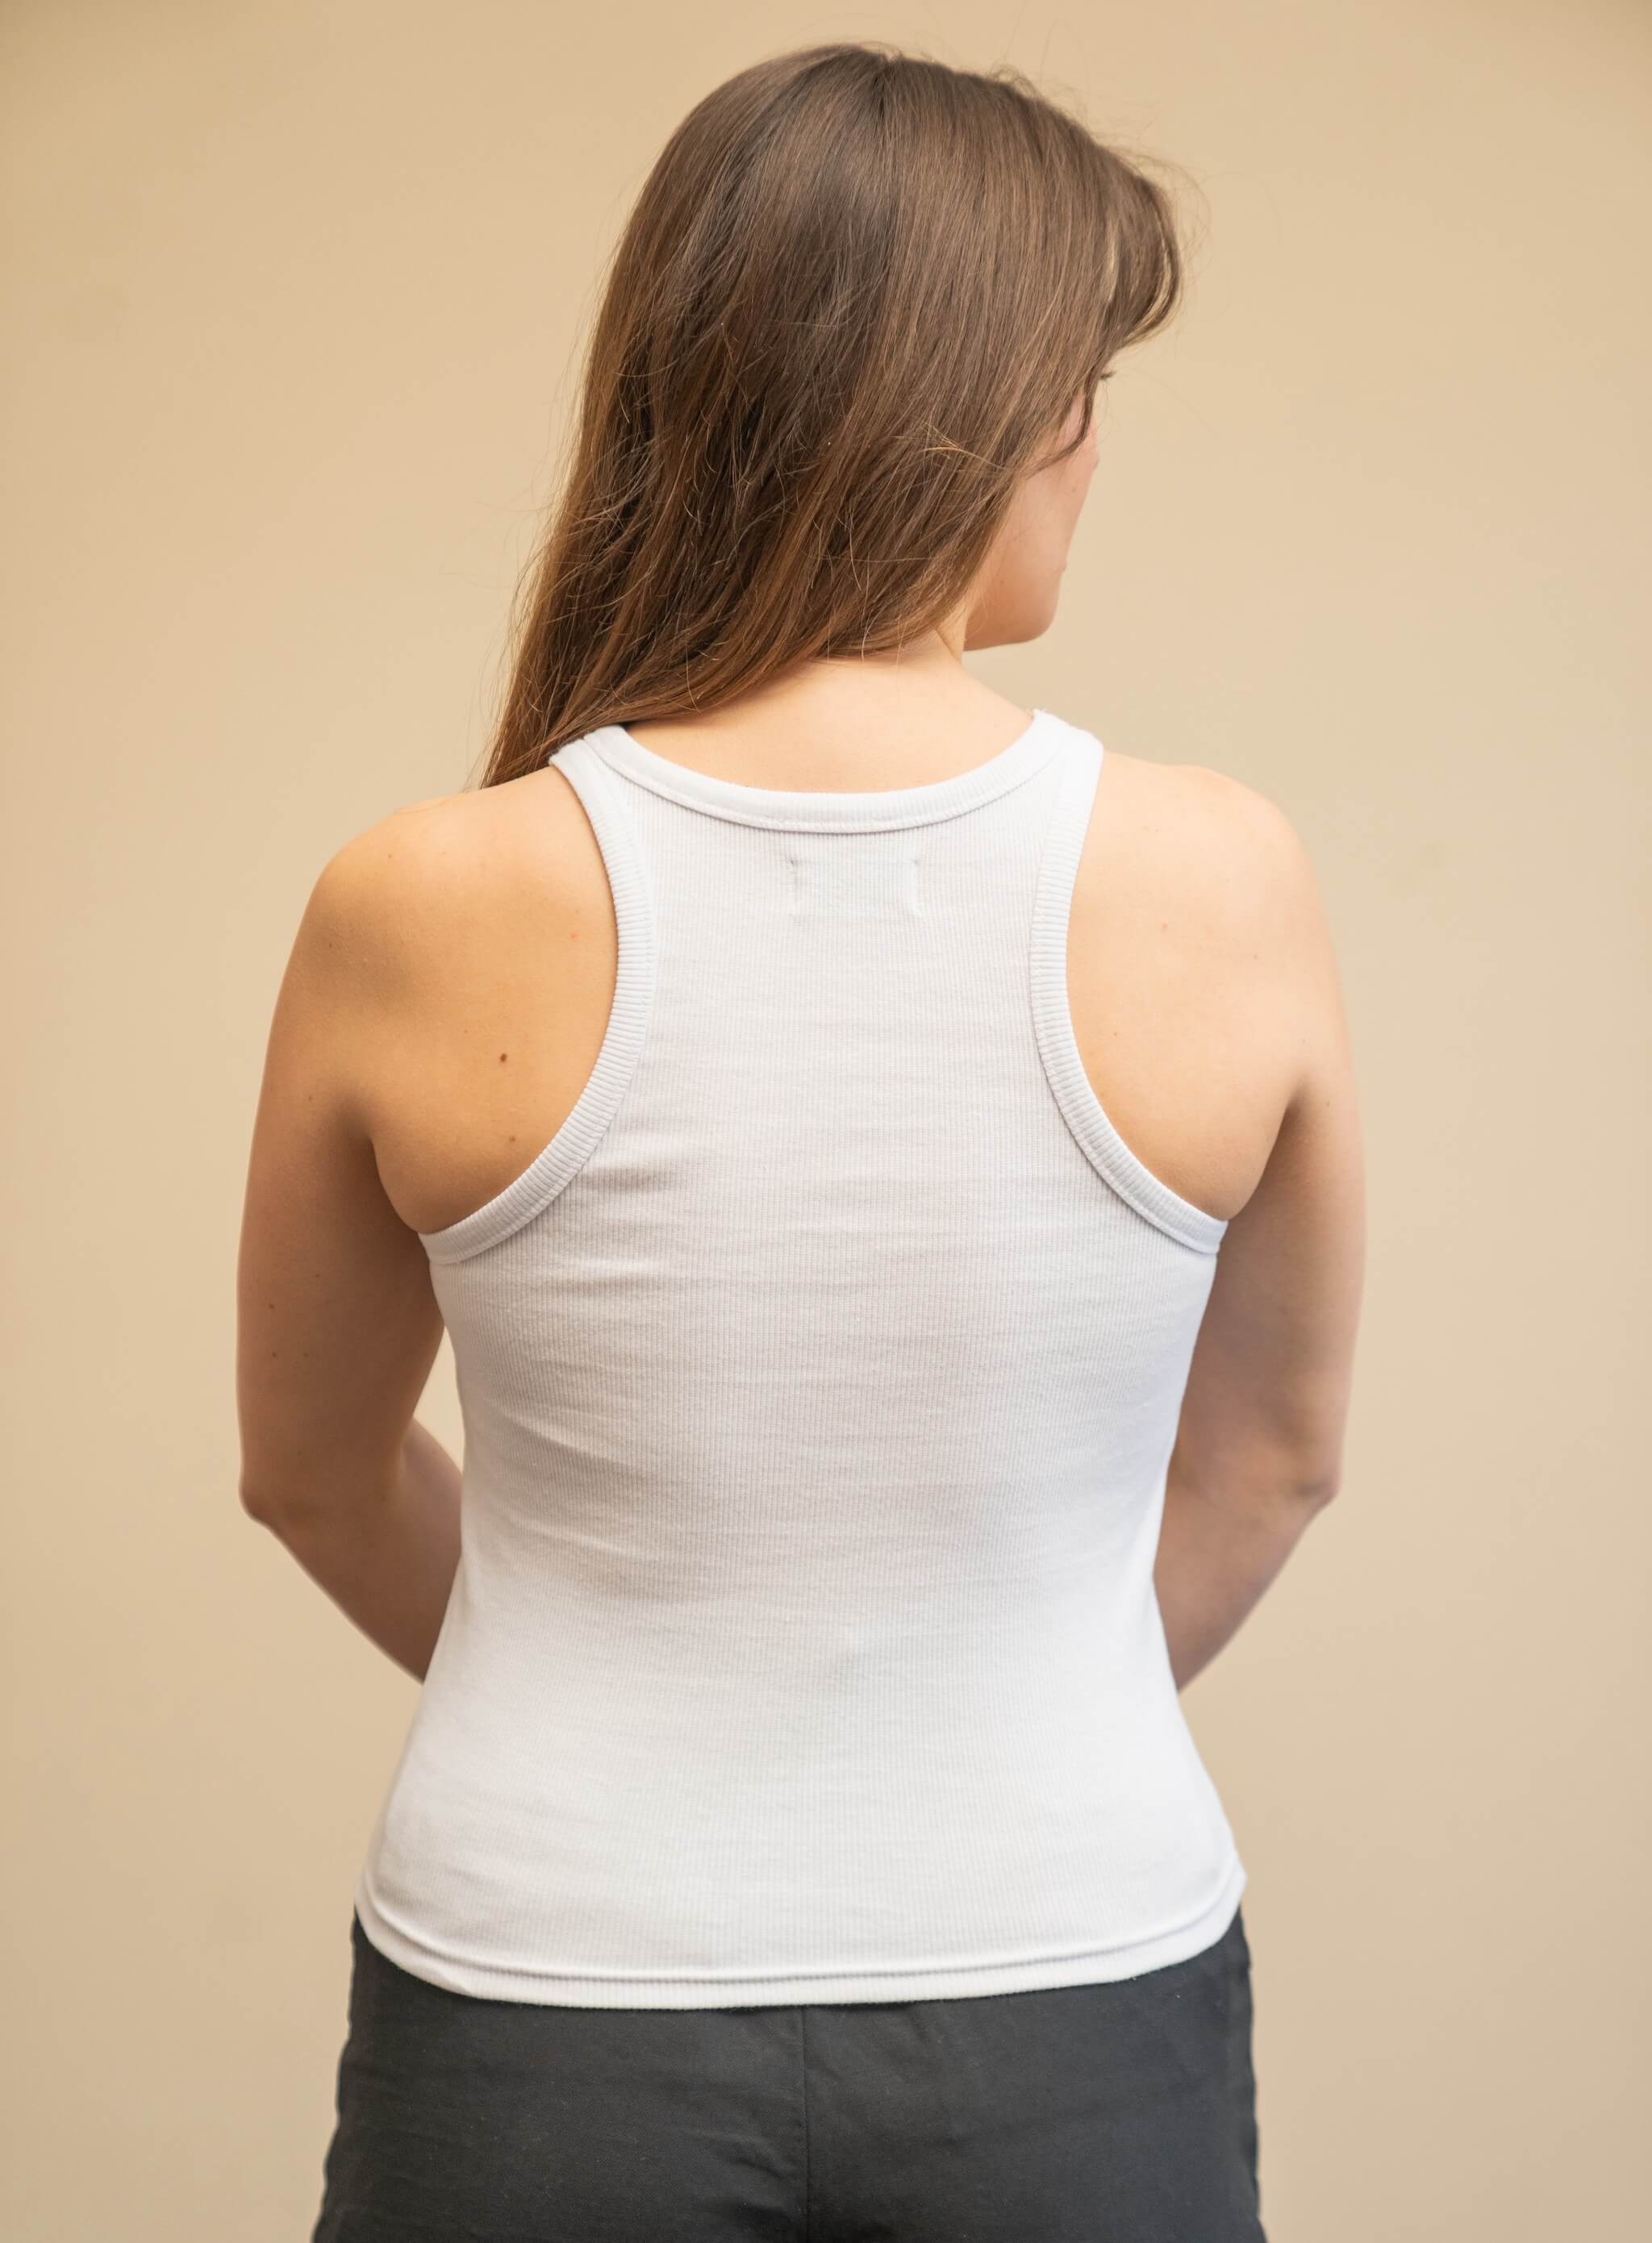 Rear view of a woman wearing a white tank top from Cyme Copenhagen's spring/summer collection. The tank top features a simple and sleek design with racerback styling. The model stands against a neutral background, highlighting the clean lines and minimalist appeal of the garment.